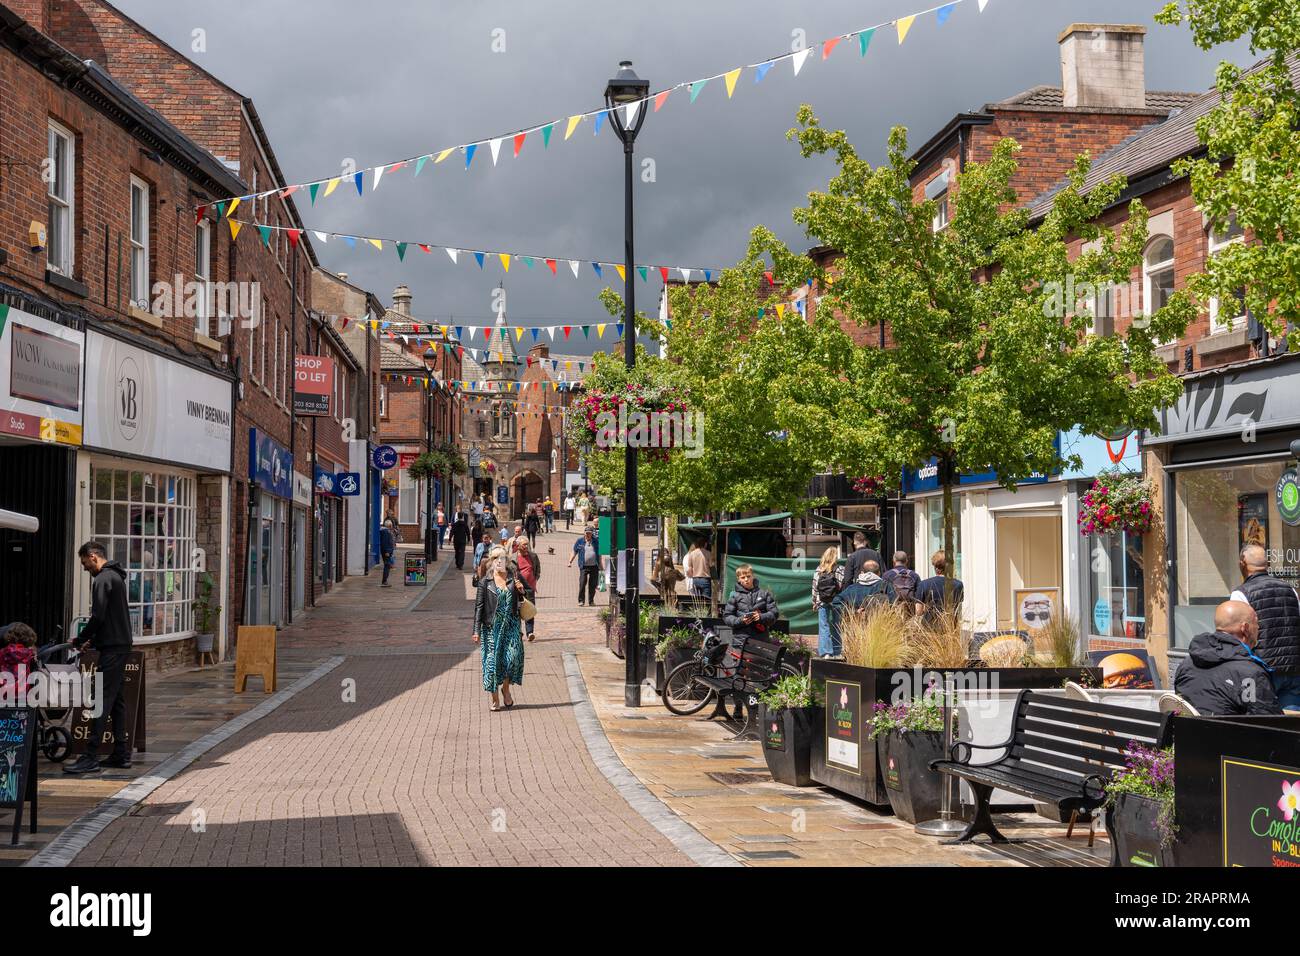 A view of the town centre of Congleton, Cheshire East, UK, with people and shops. Stock Photo